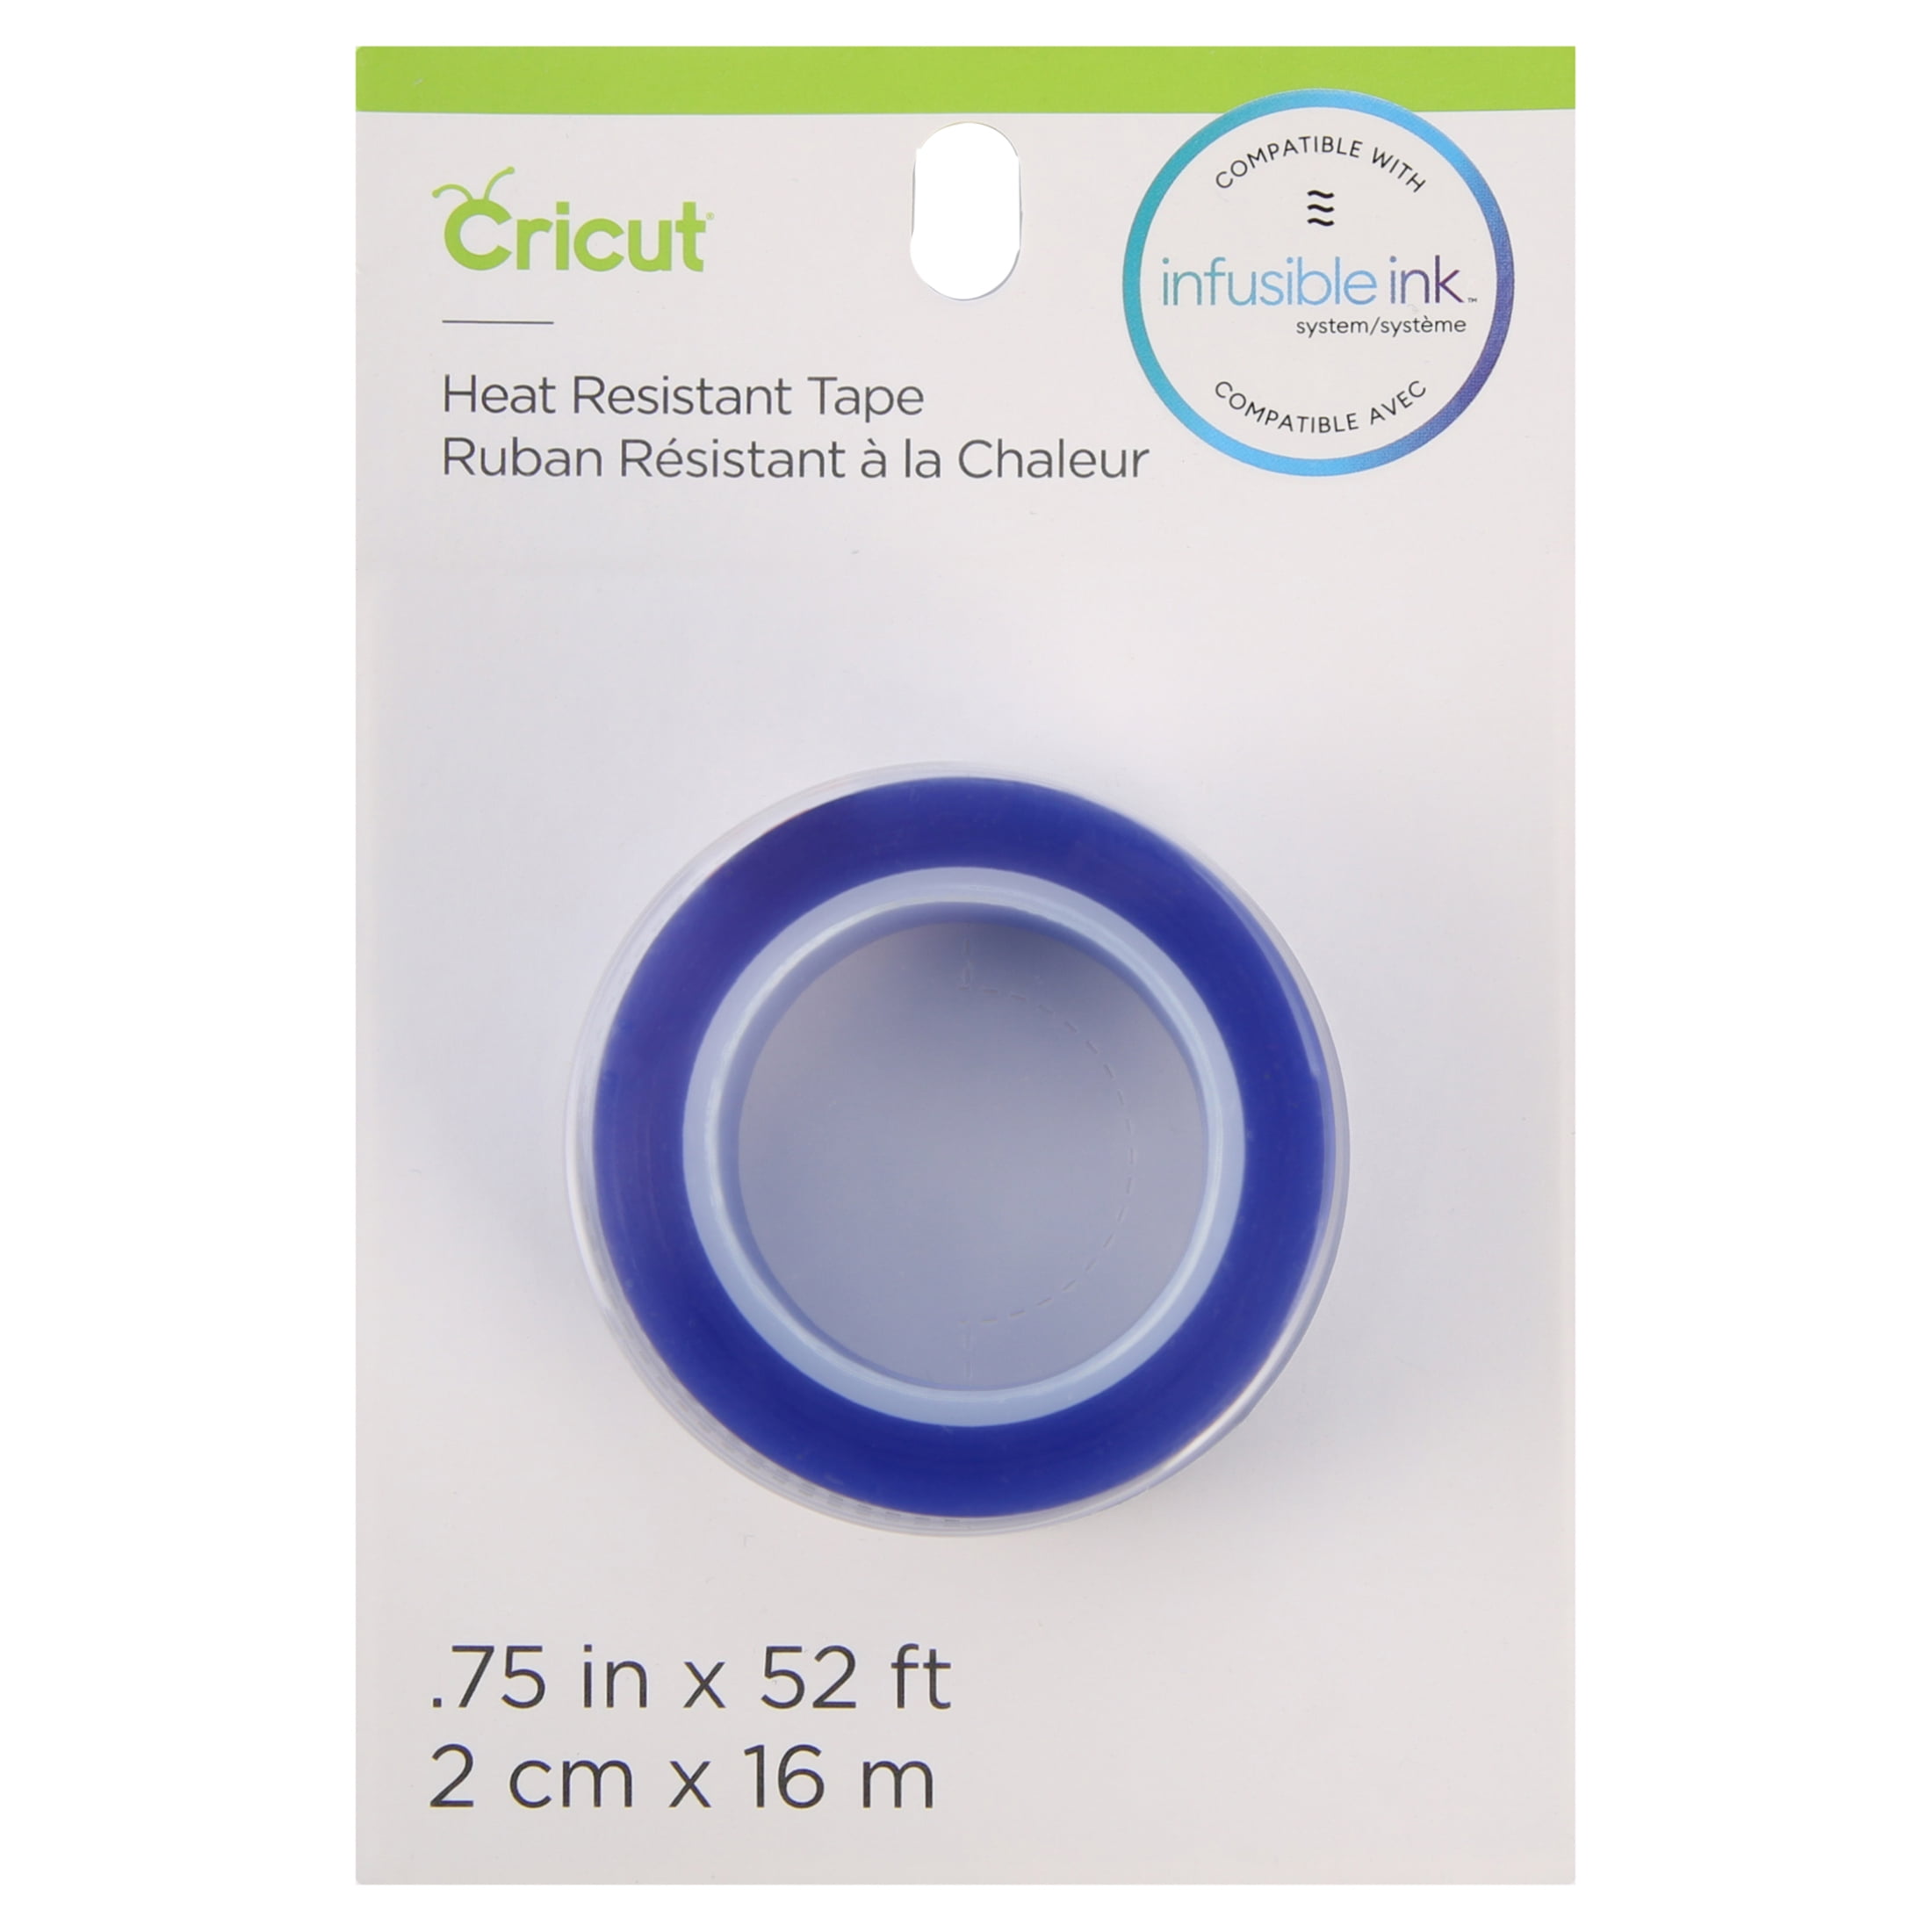 Cricut Heat Resistant Tape for Infusible Ink